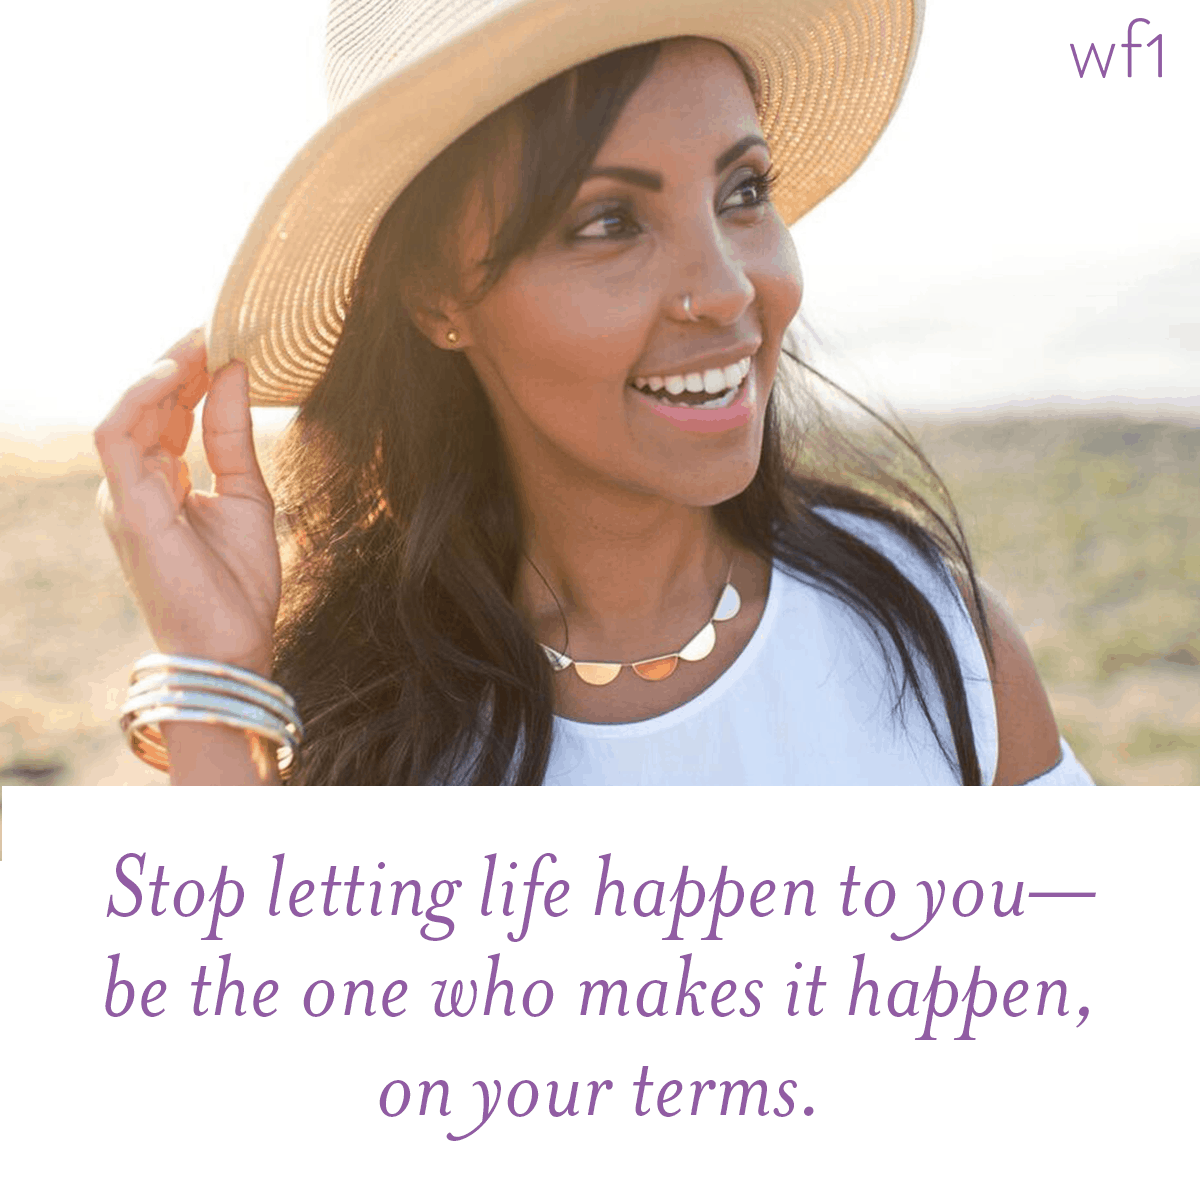 Stop letting life happen to you—be the one who makes it happen, on your terms.